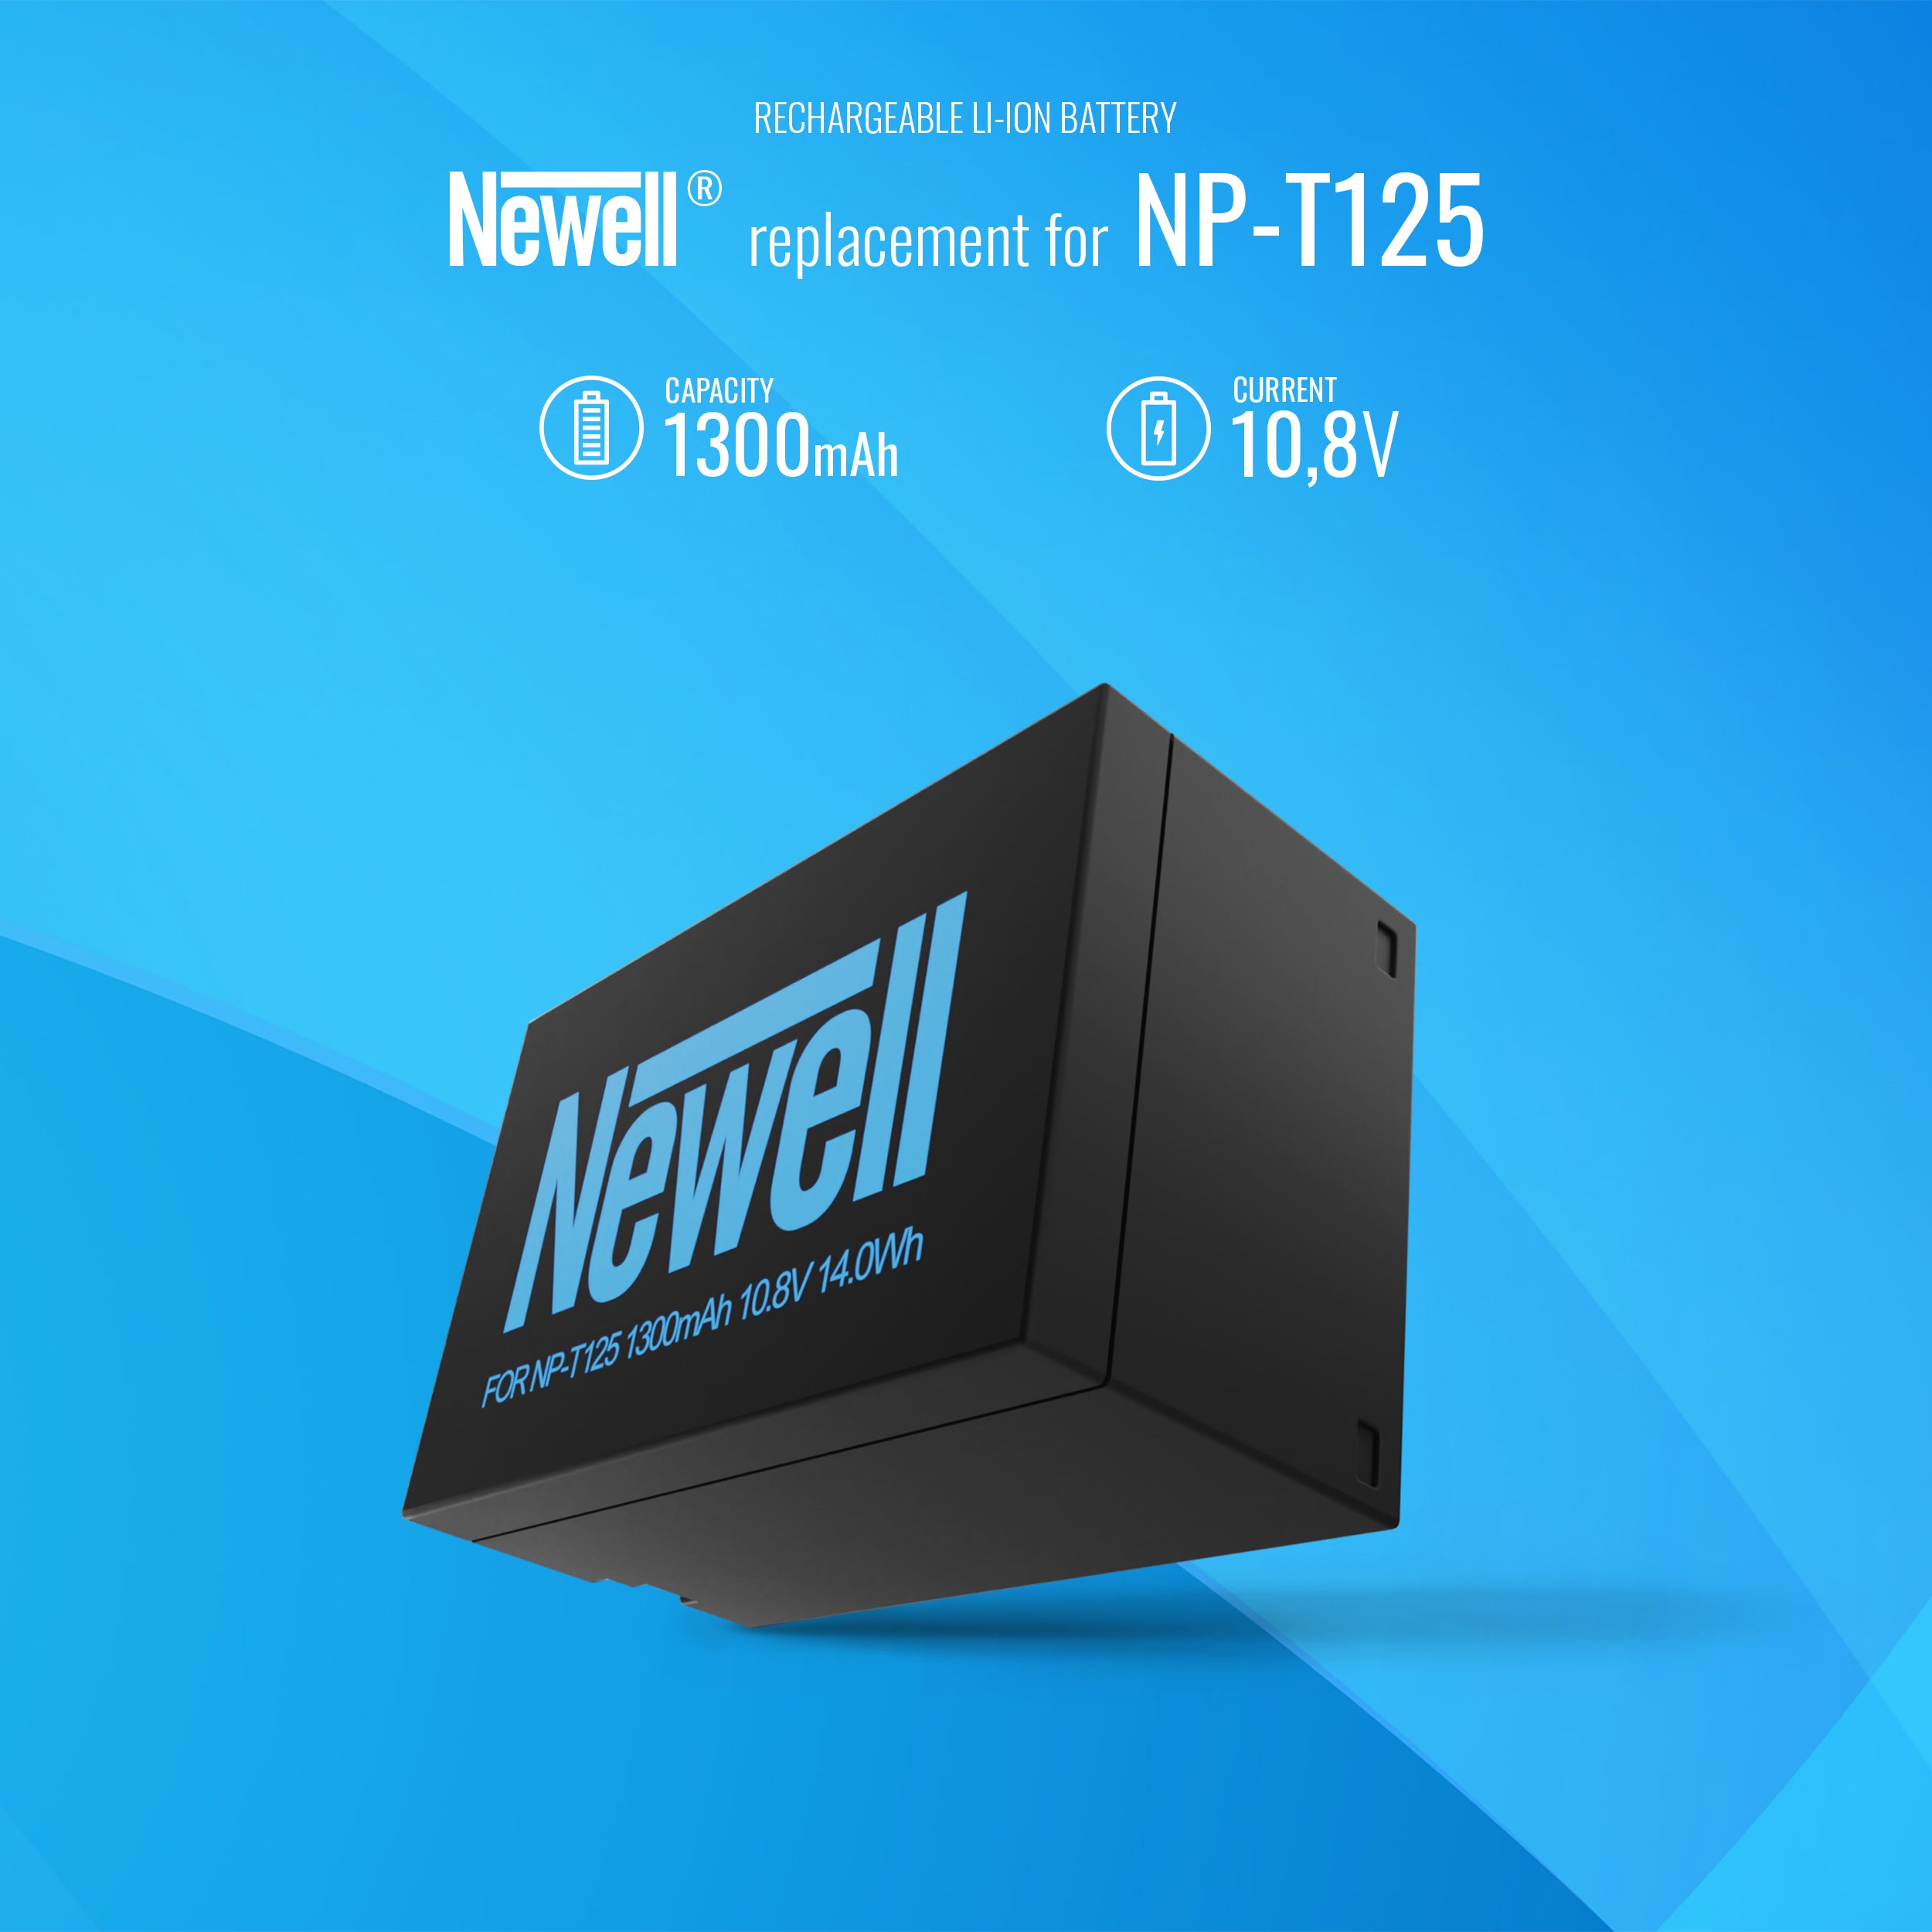 Newell rechargeable battery NP-T125